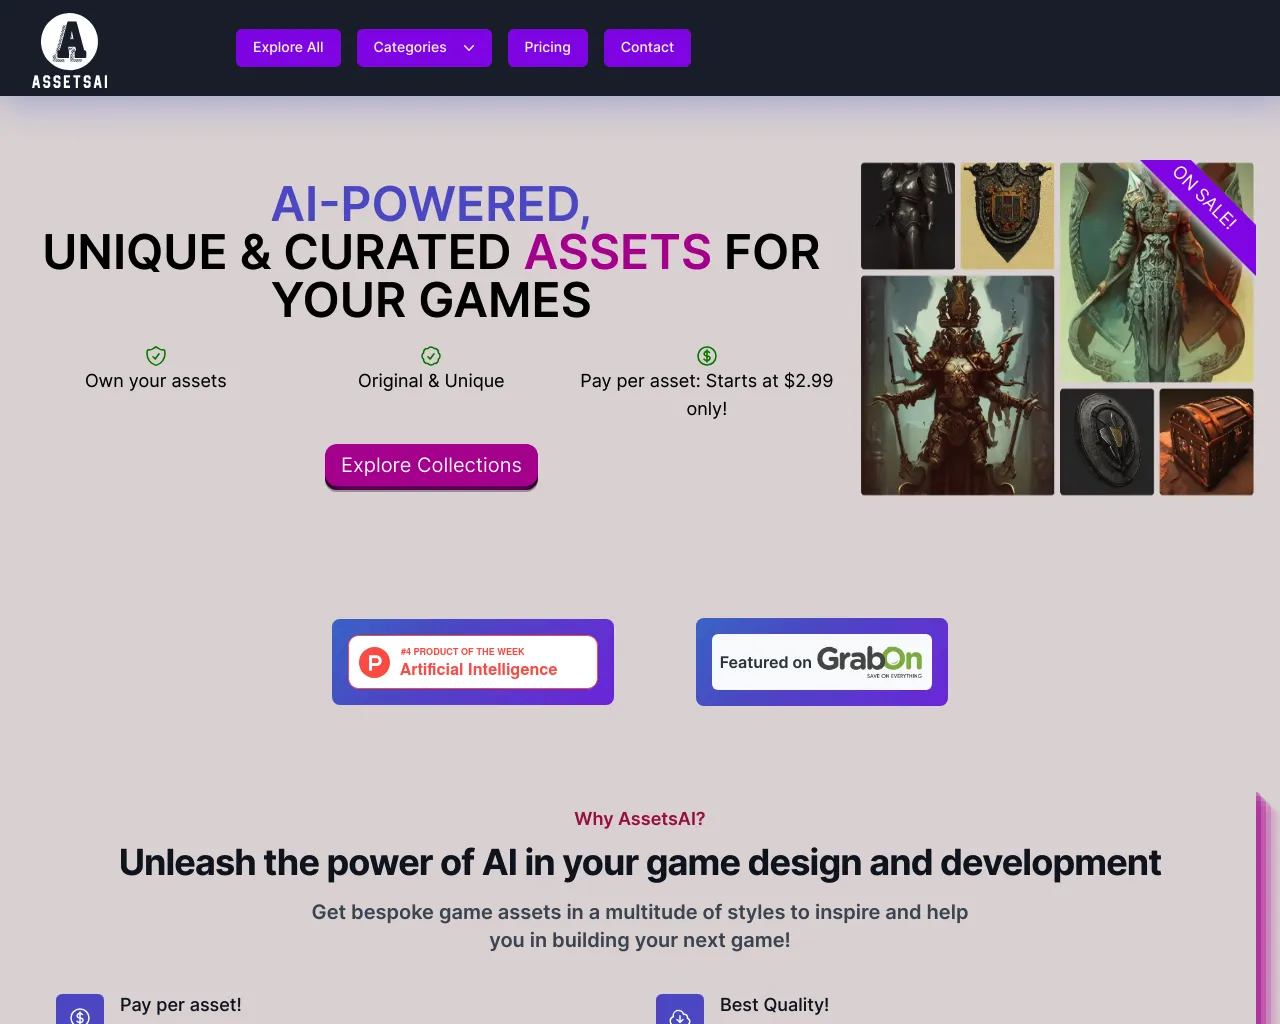 AI-Powered, Unique & Curated Assets for Your Games